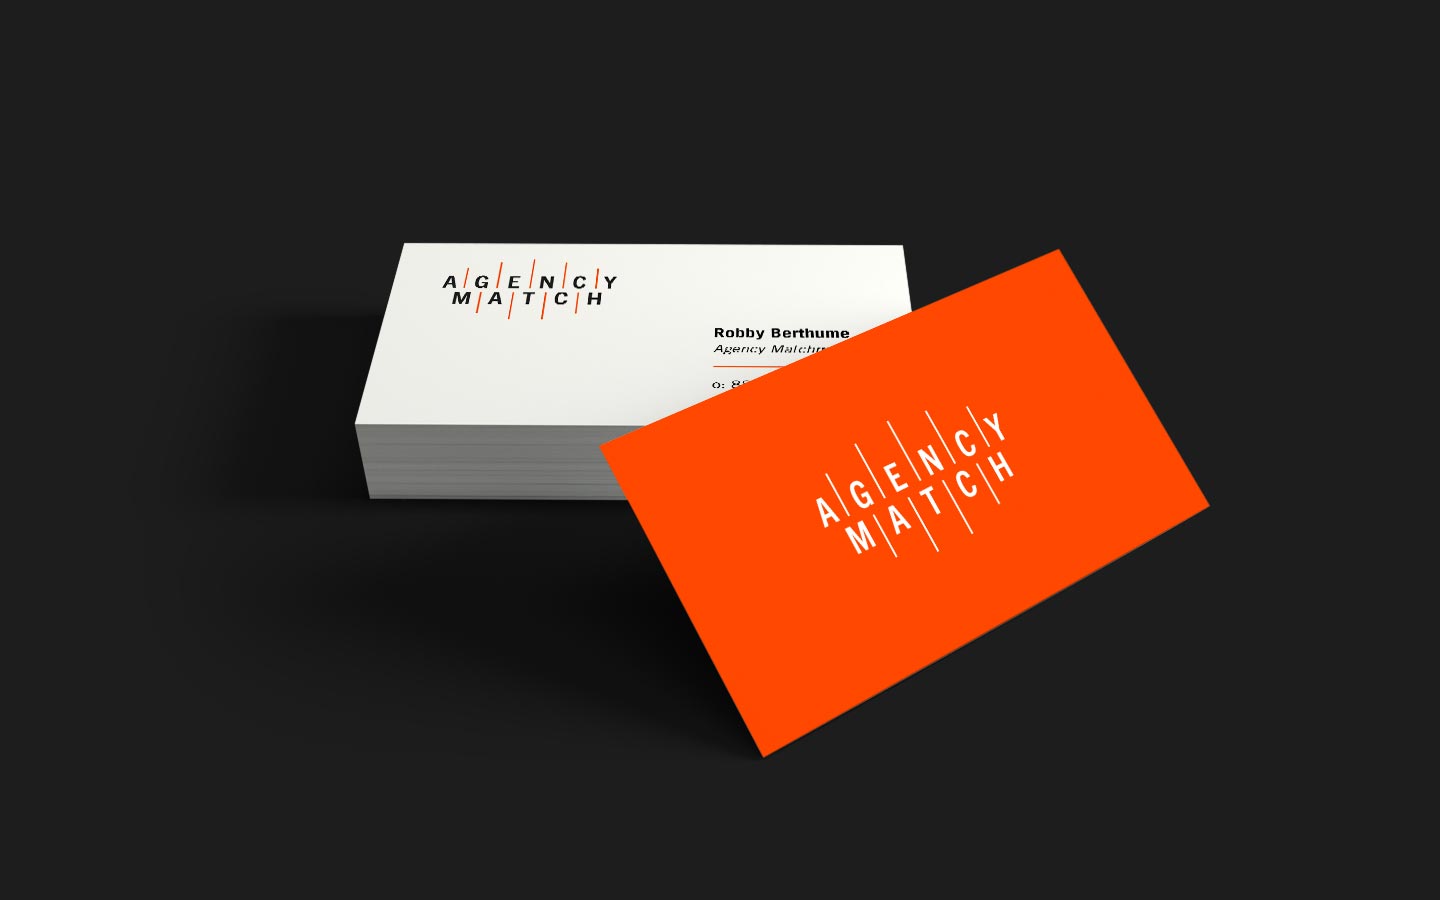 Agency match business cards2